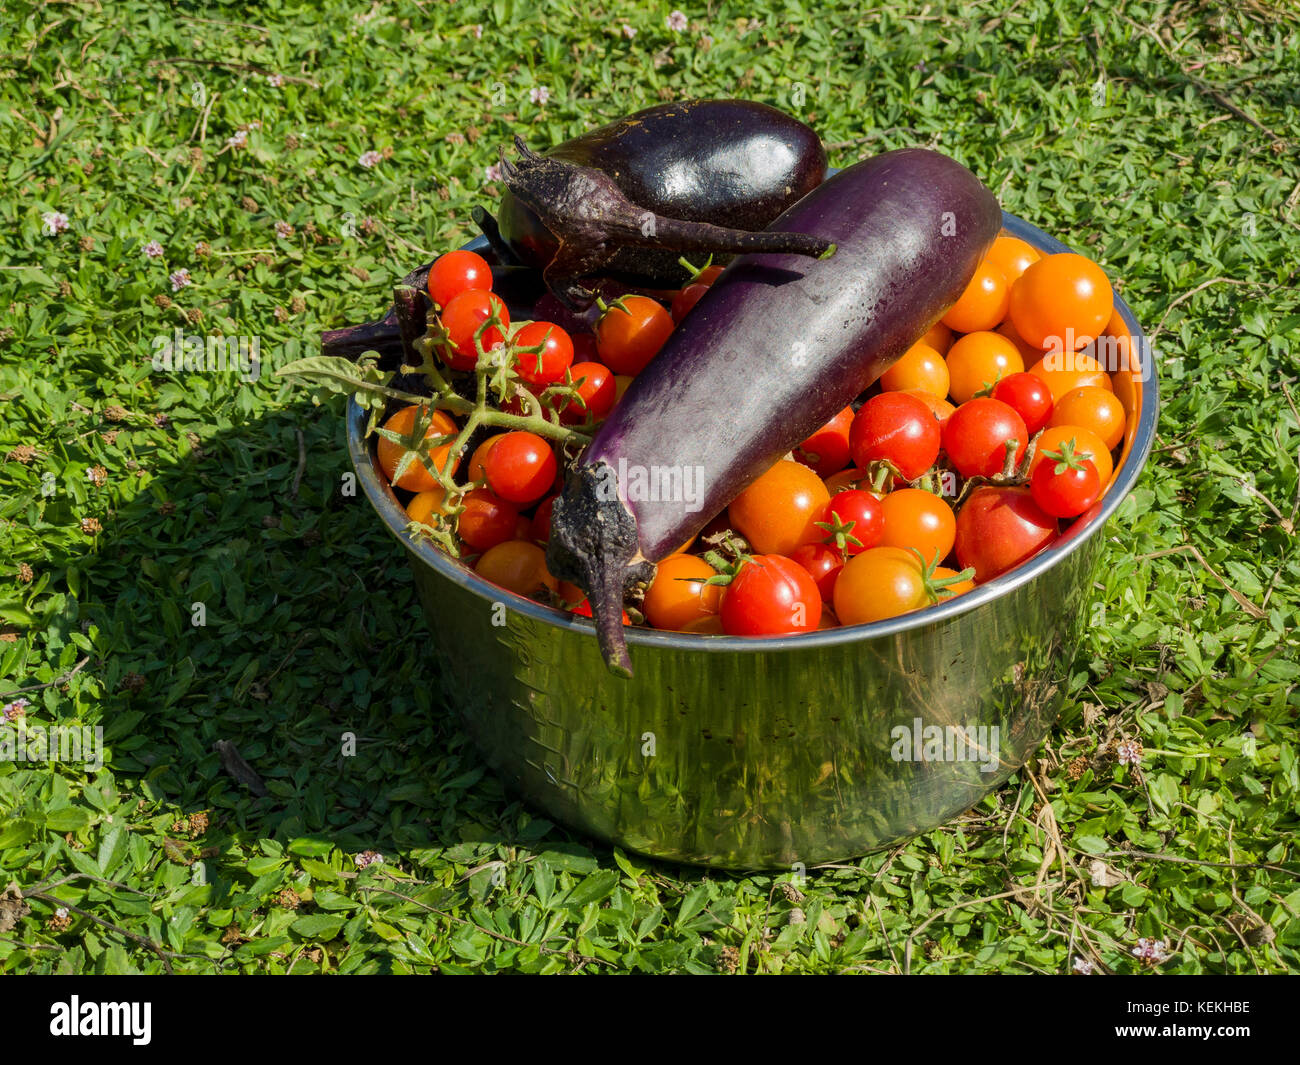 Big harvest of eggplant, tomato, in home garden at Los Angeles Stock Photo